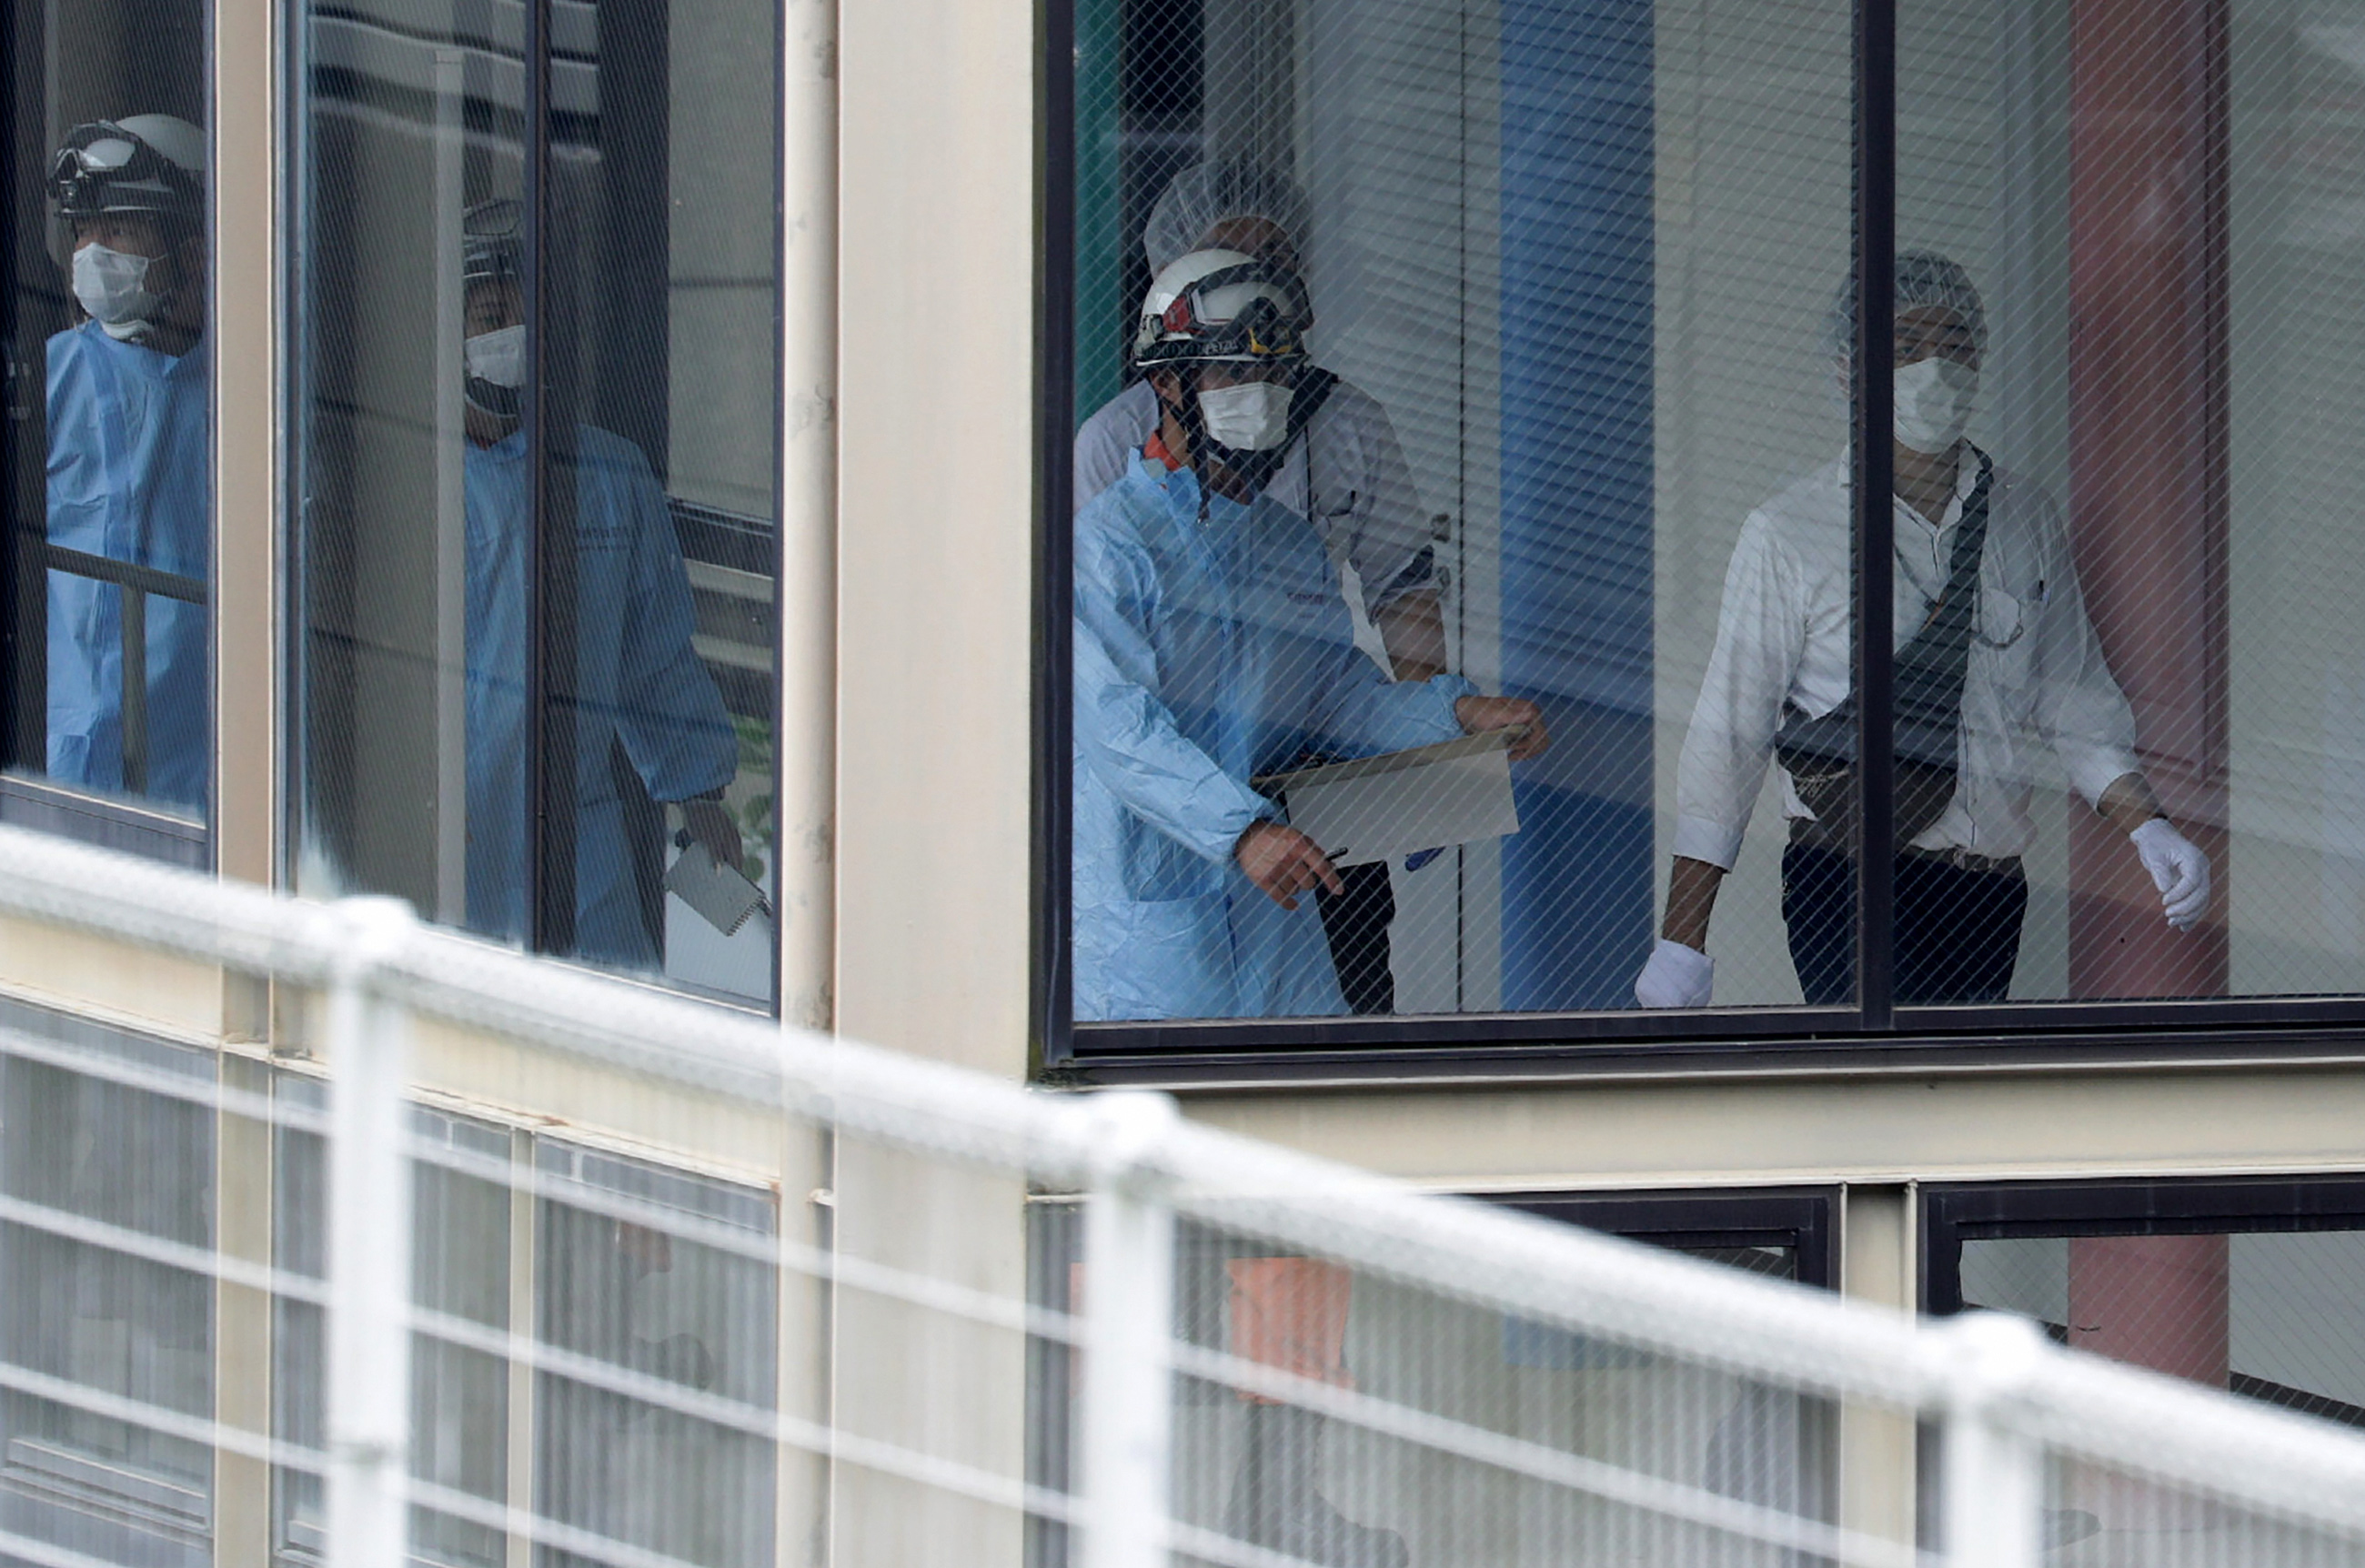 Rescue workers are seen at the Tsukui Yamayuri En care centre where a knife-wielding man went on a rampage in the city of Sagamihara, Kanagawa prefecture, some 50 kms (30 miles) west of Tokyo on July 26, 2016. At least 19 people were killed when the man went on a rampage at the care centre for the mentally disabled in Japan early on July 26, a fire official said. / AFP PHOTO / JIJI PRESS / JIJI PRESS / Japan OUT